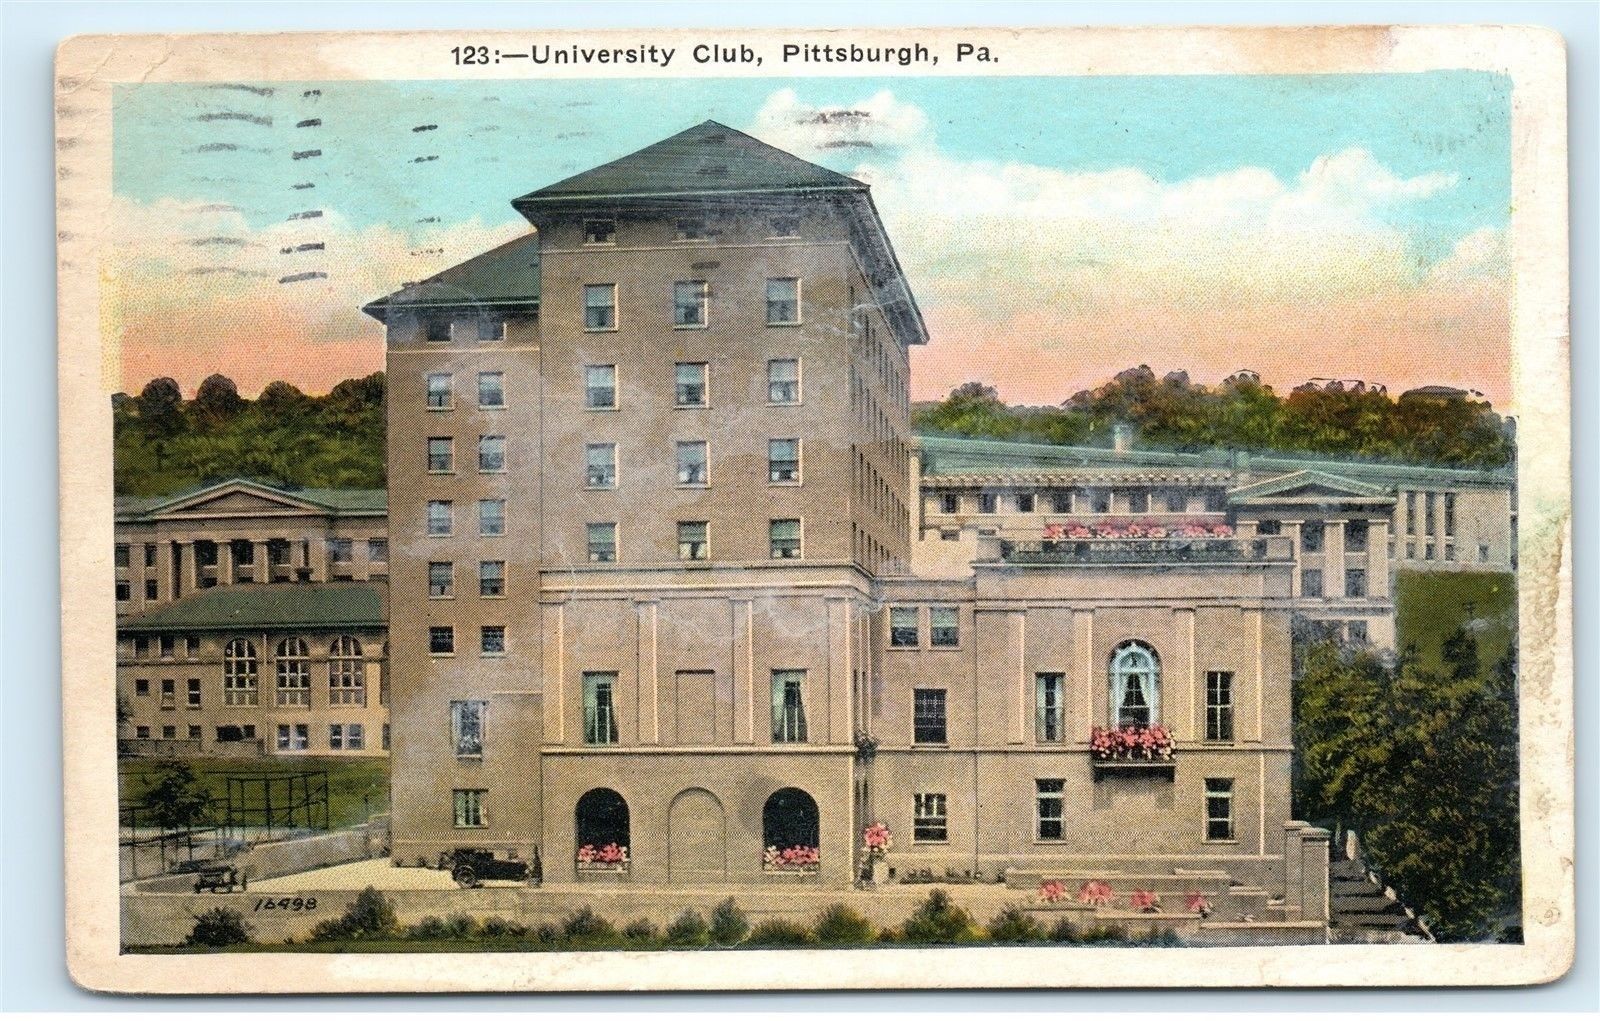 University Club History – University Club – University of Pittsburgh